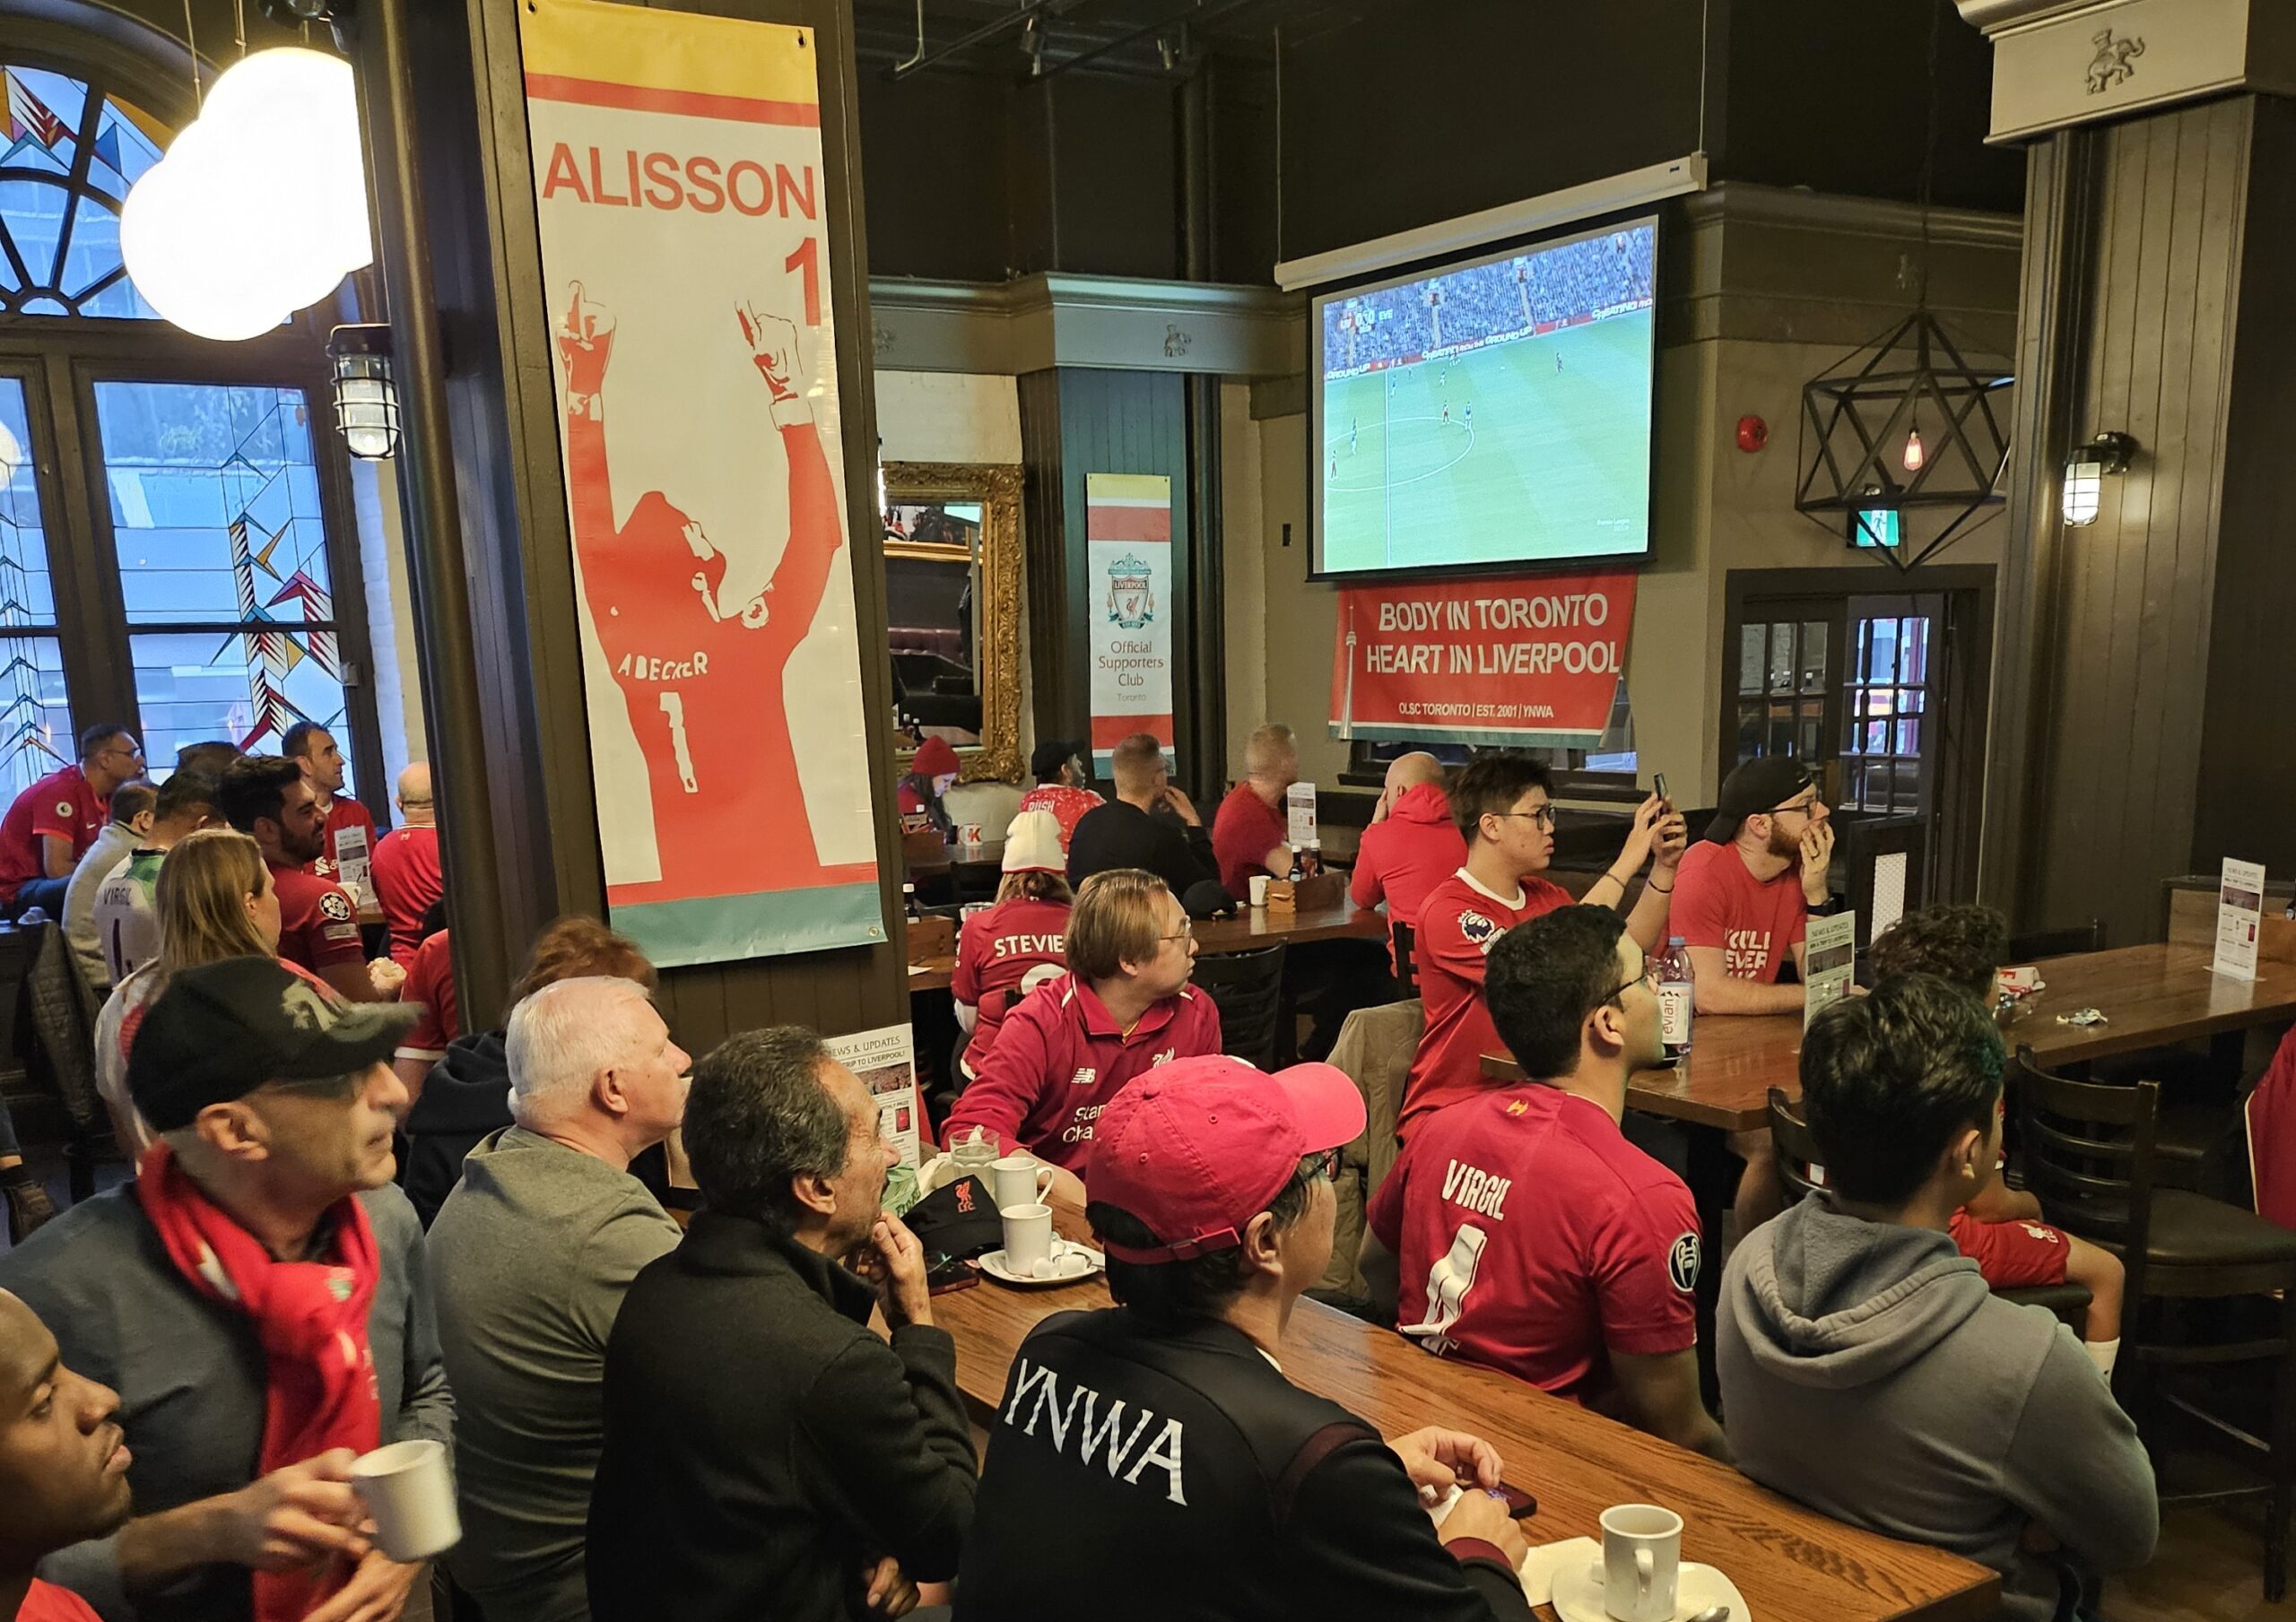 Watch Liverpool FC play in Toronto Official Supporters Club